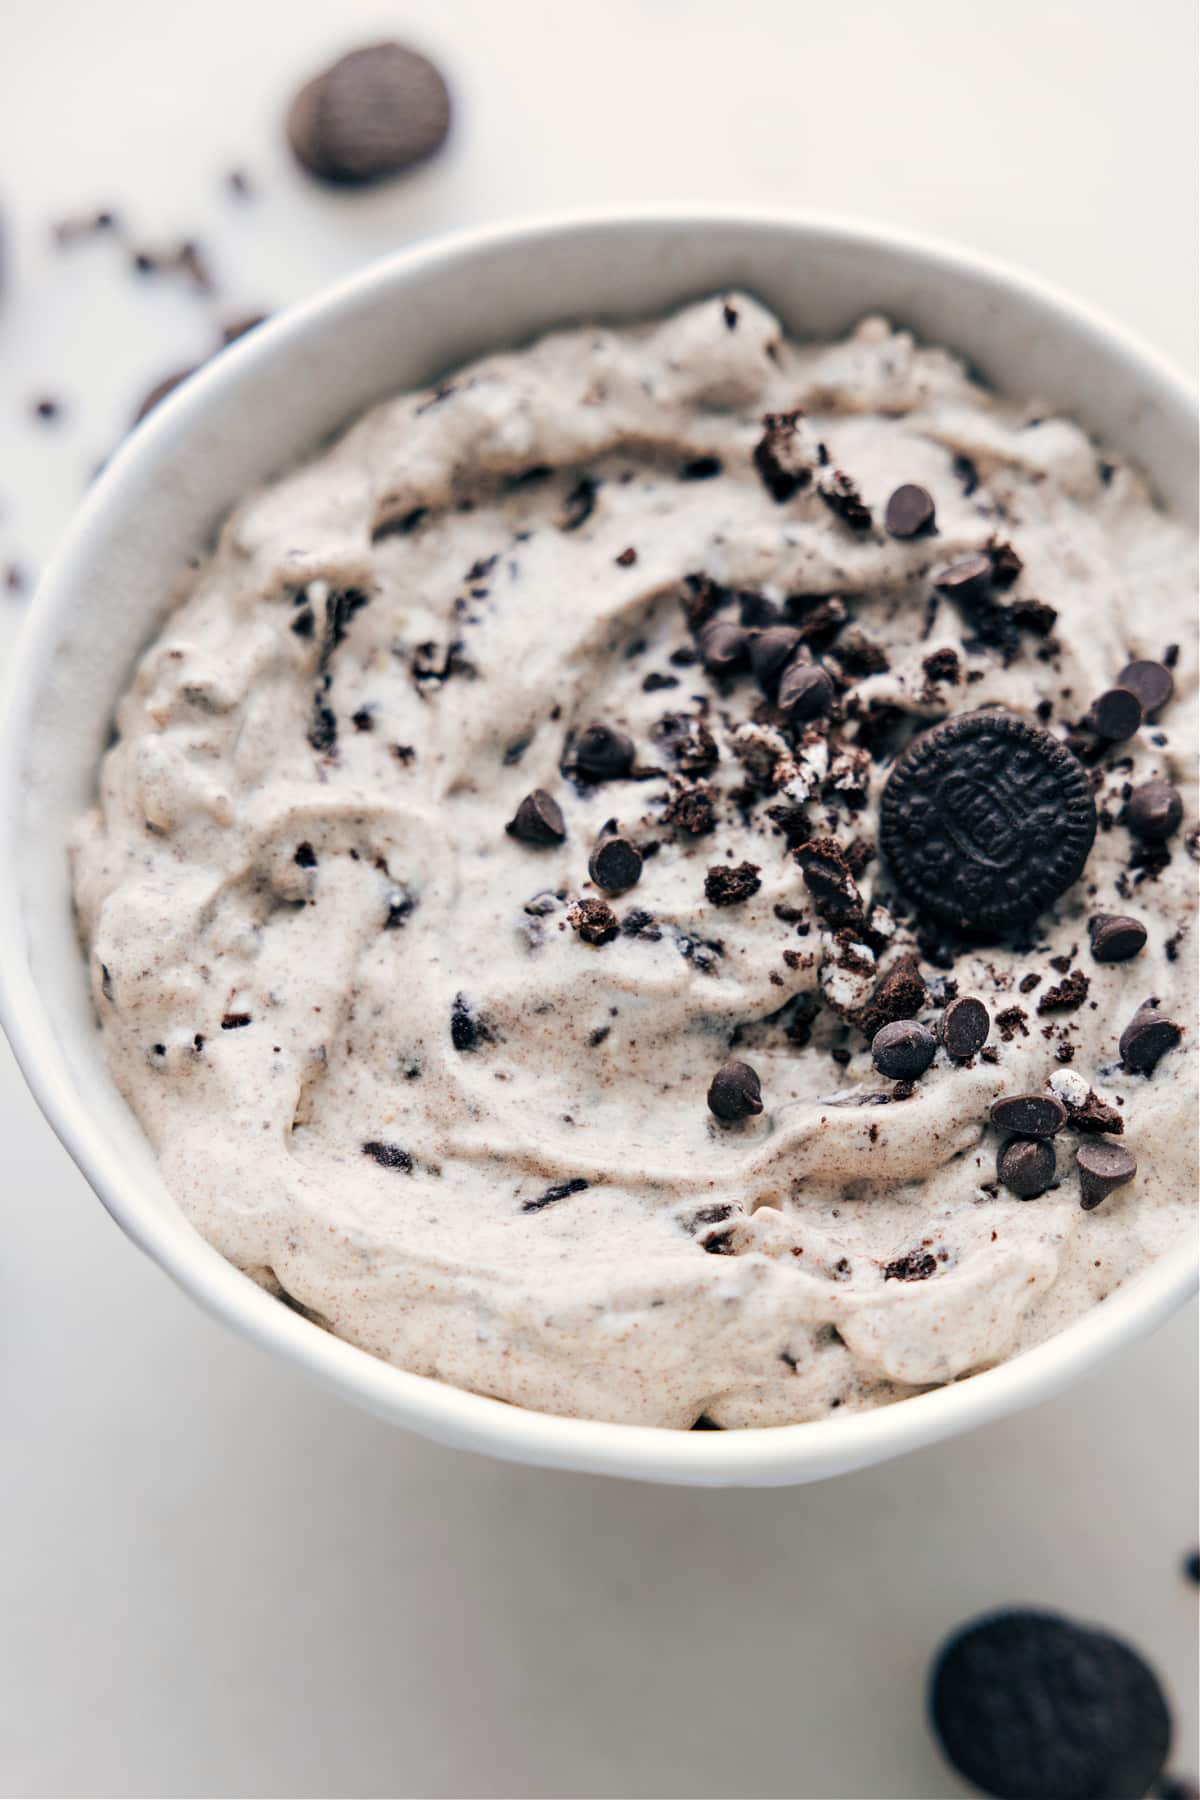 Oreo Fluff in a bowl ready to be enjoyed.